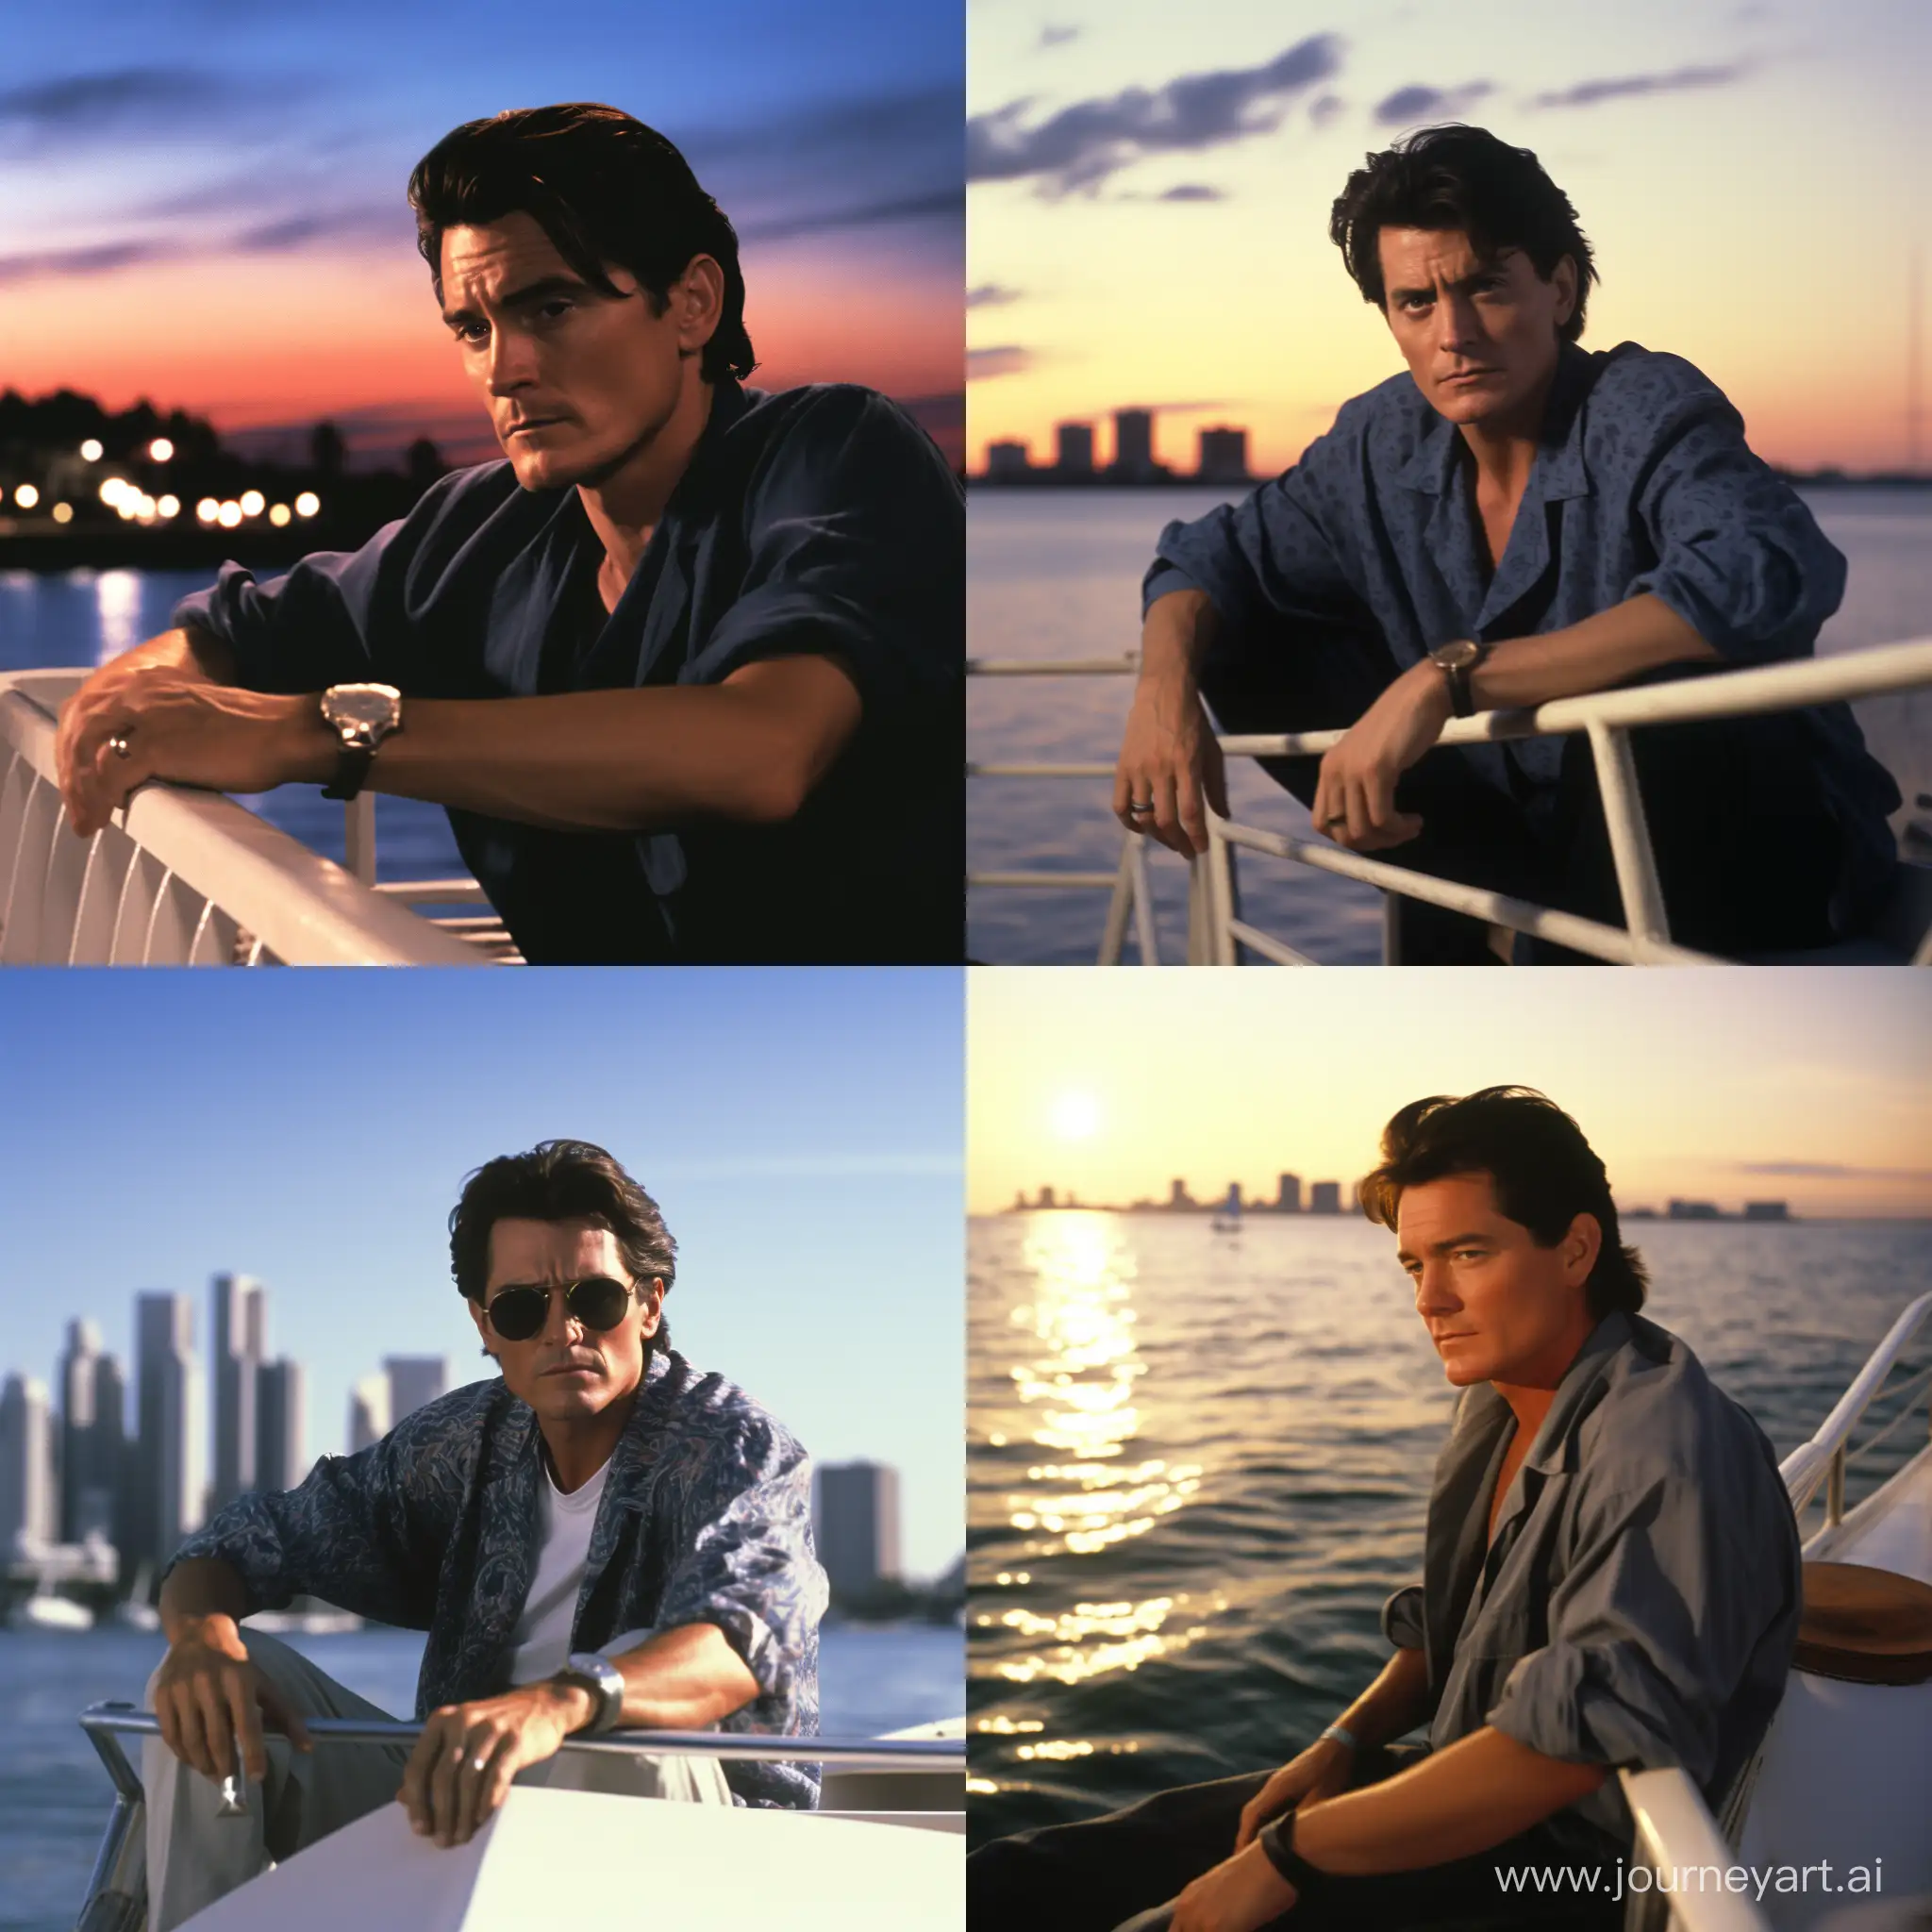 Escene Cinematic from movie of John carpenter the 1980s of Charlie Sheen on boat in Miami Beach 